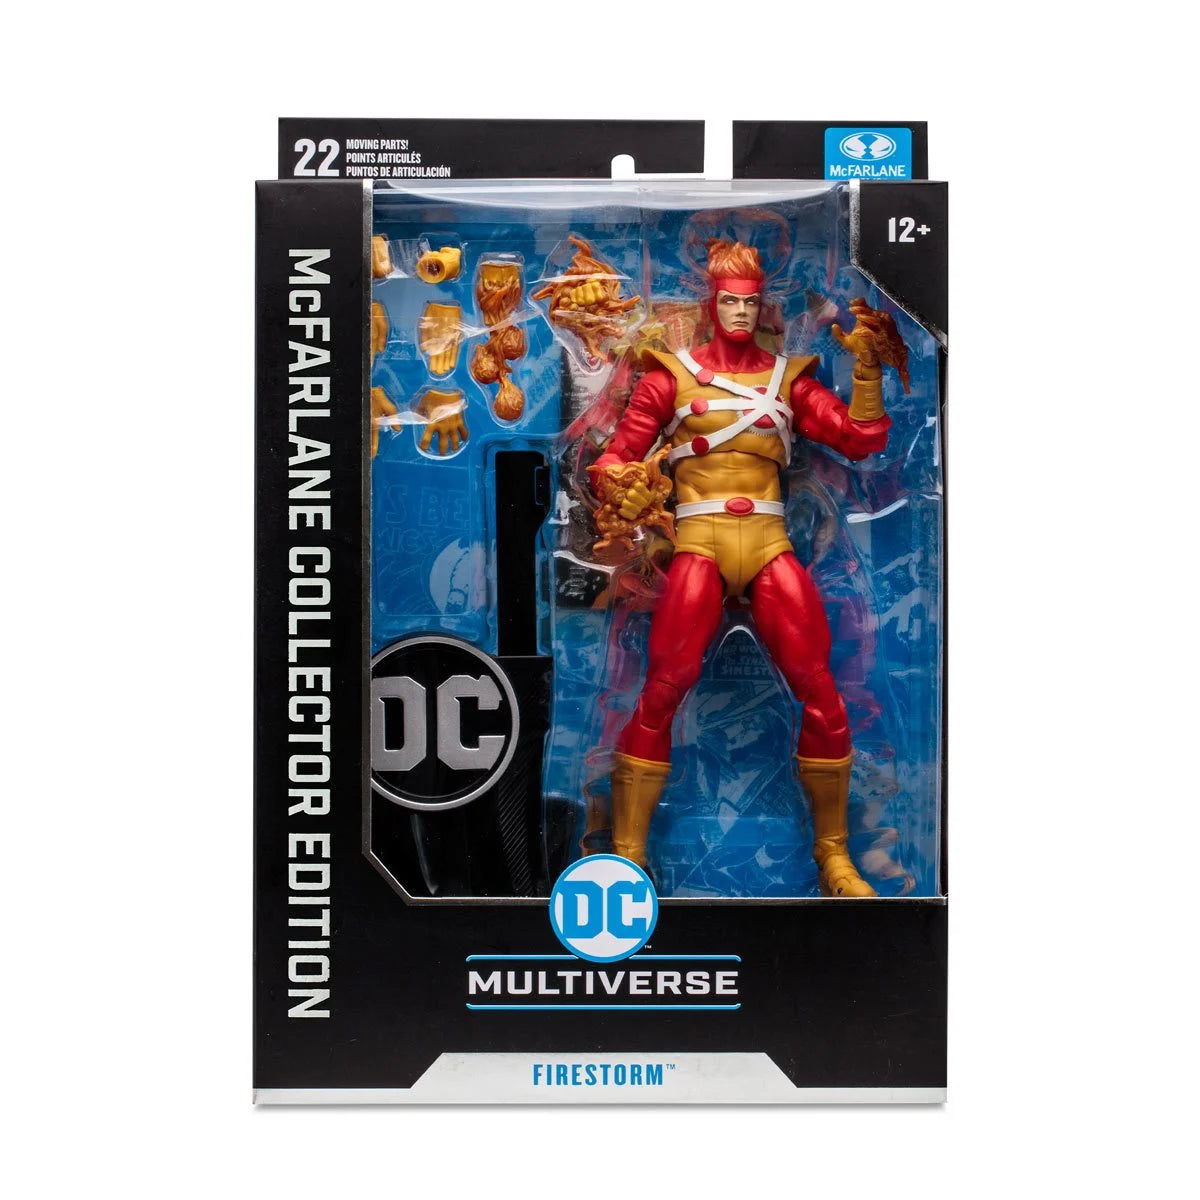 DC McFarlane Collector Edition Wave 2 Firestorm Crisis on Infinite Earths 7-Inch Scale Action Figure in a package - Heretoserveyou